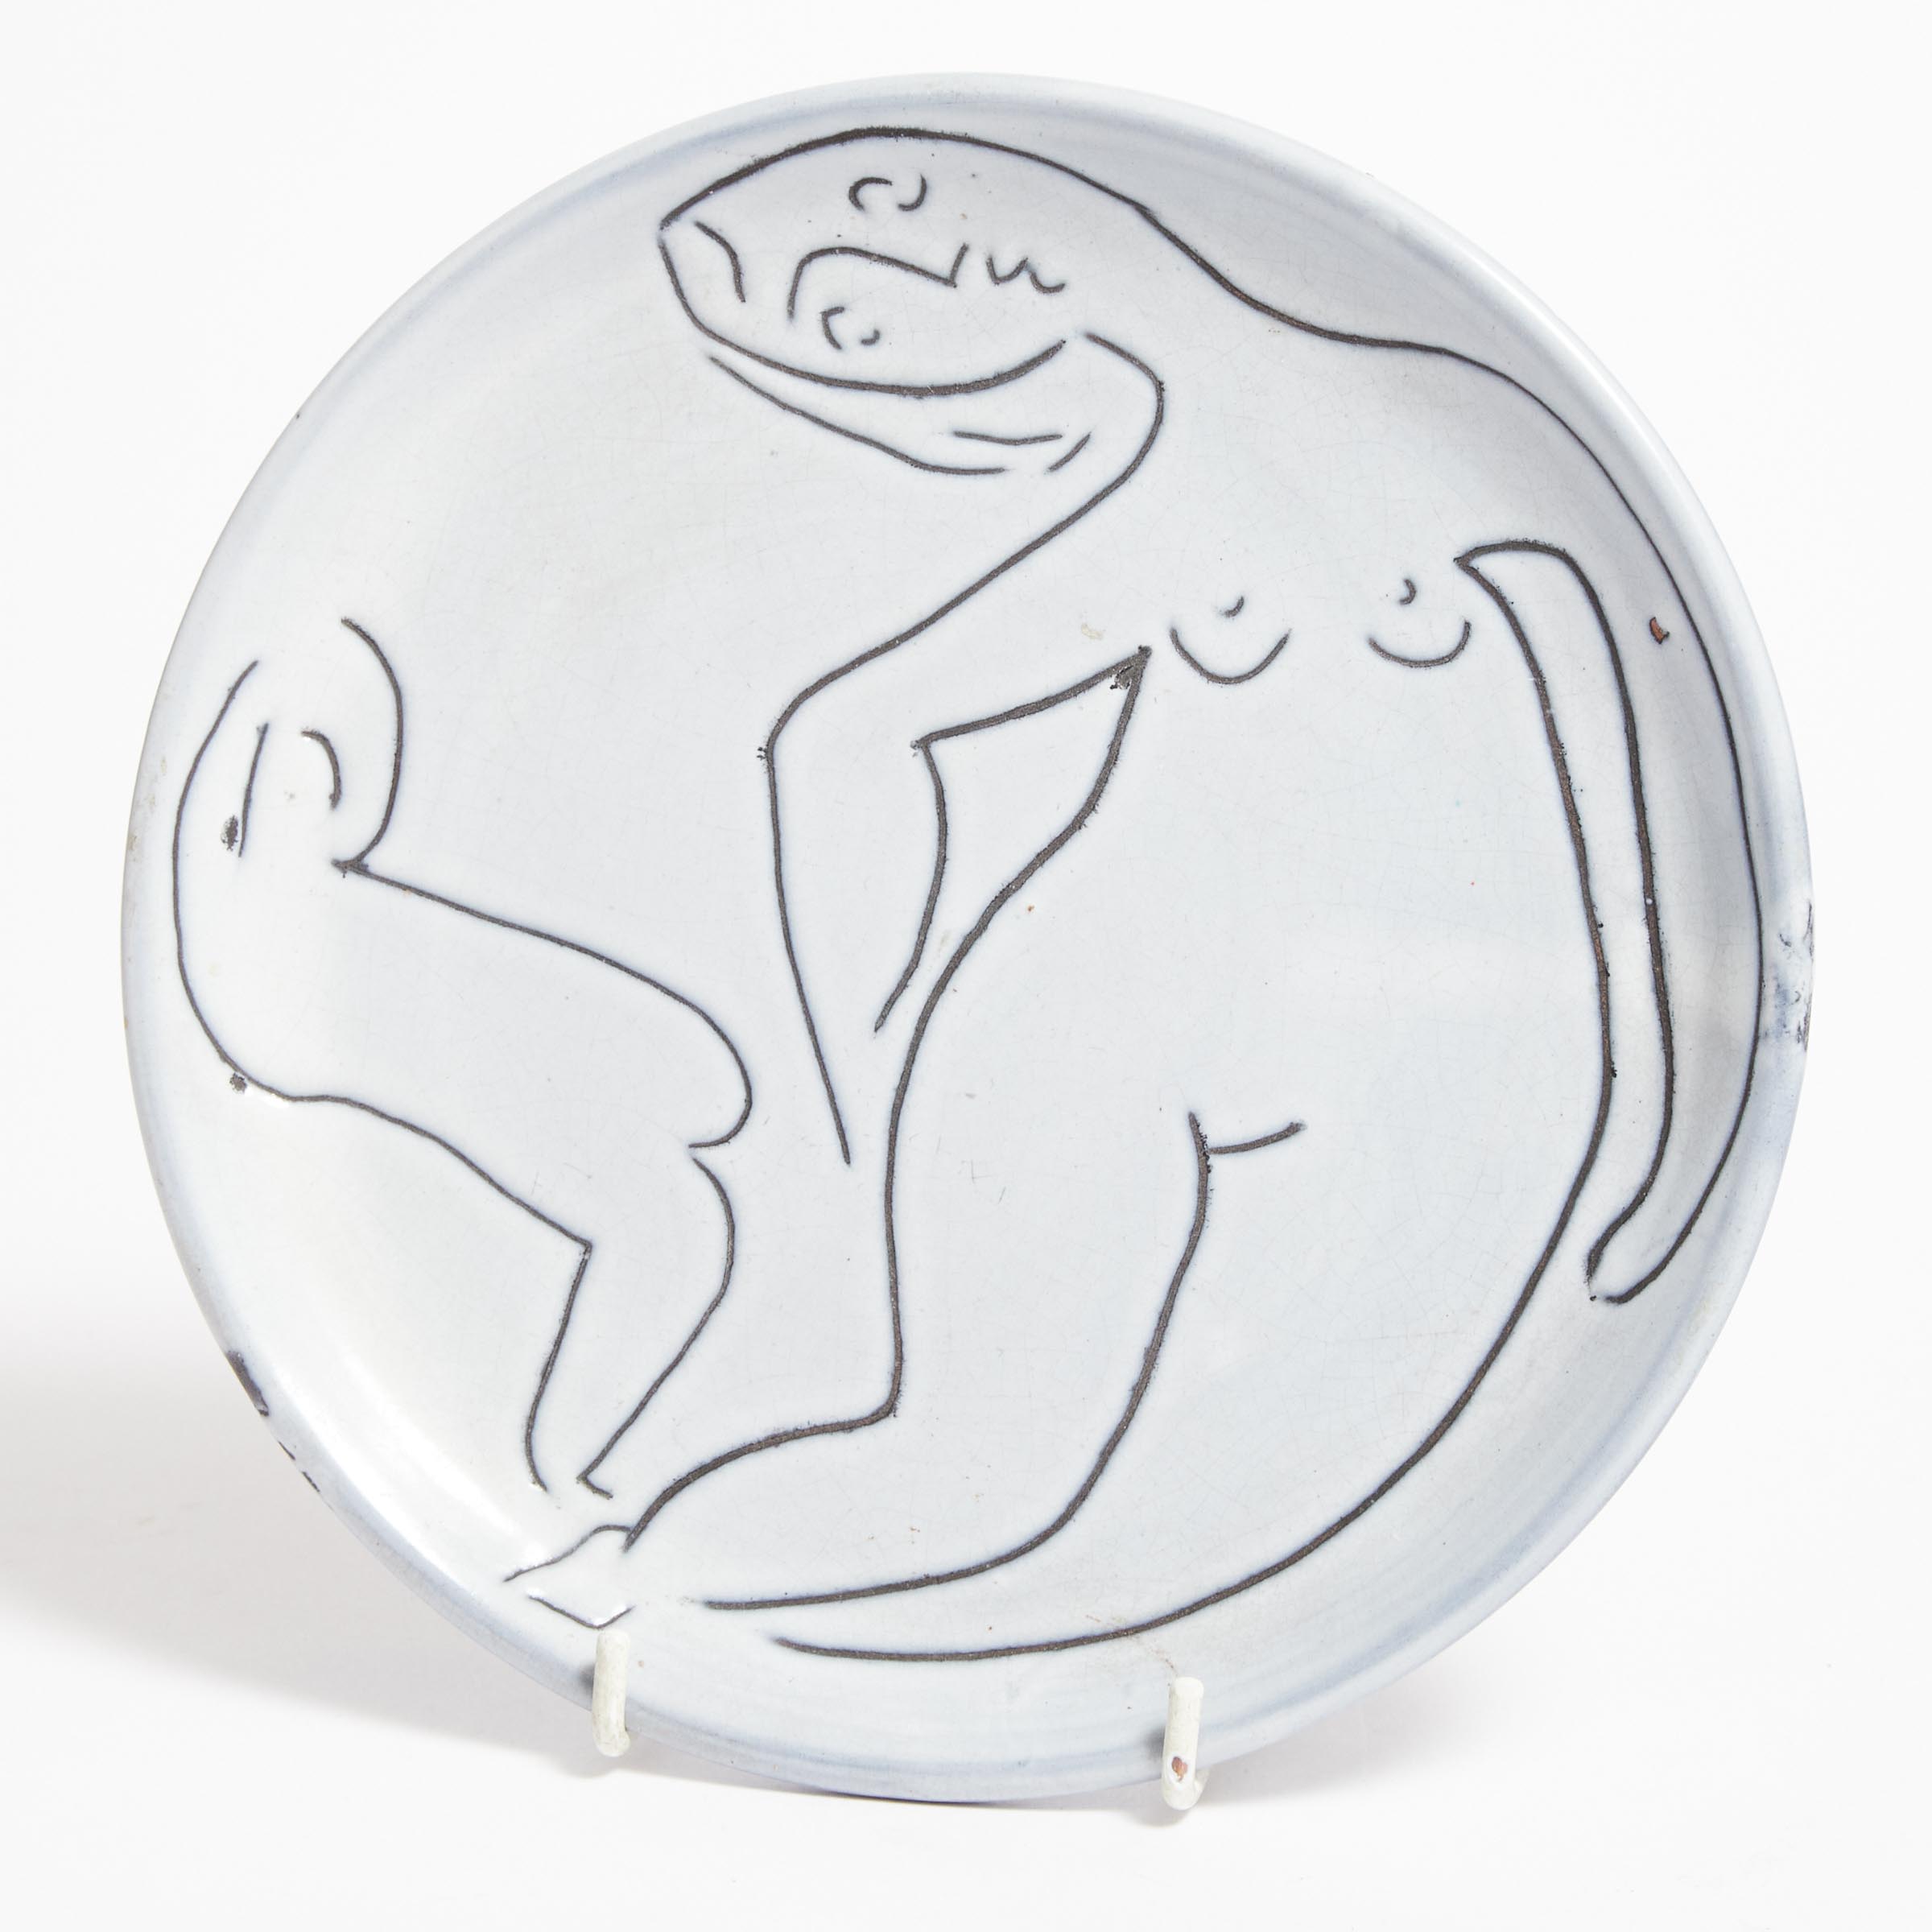 Jacques Innocenti (French, 1926-1958), Small Figural Plate, 1950s, diameter 7.9 in — 20 cm